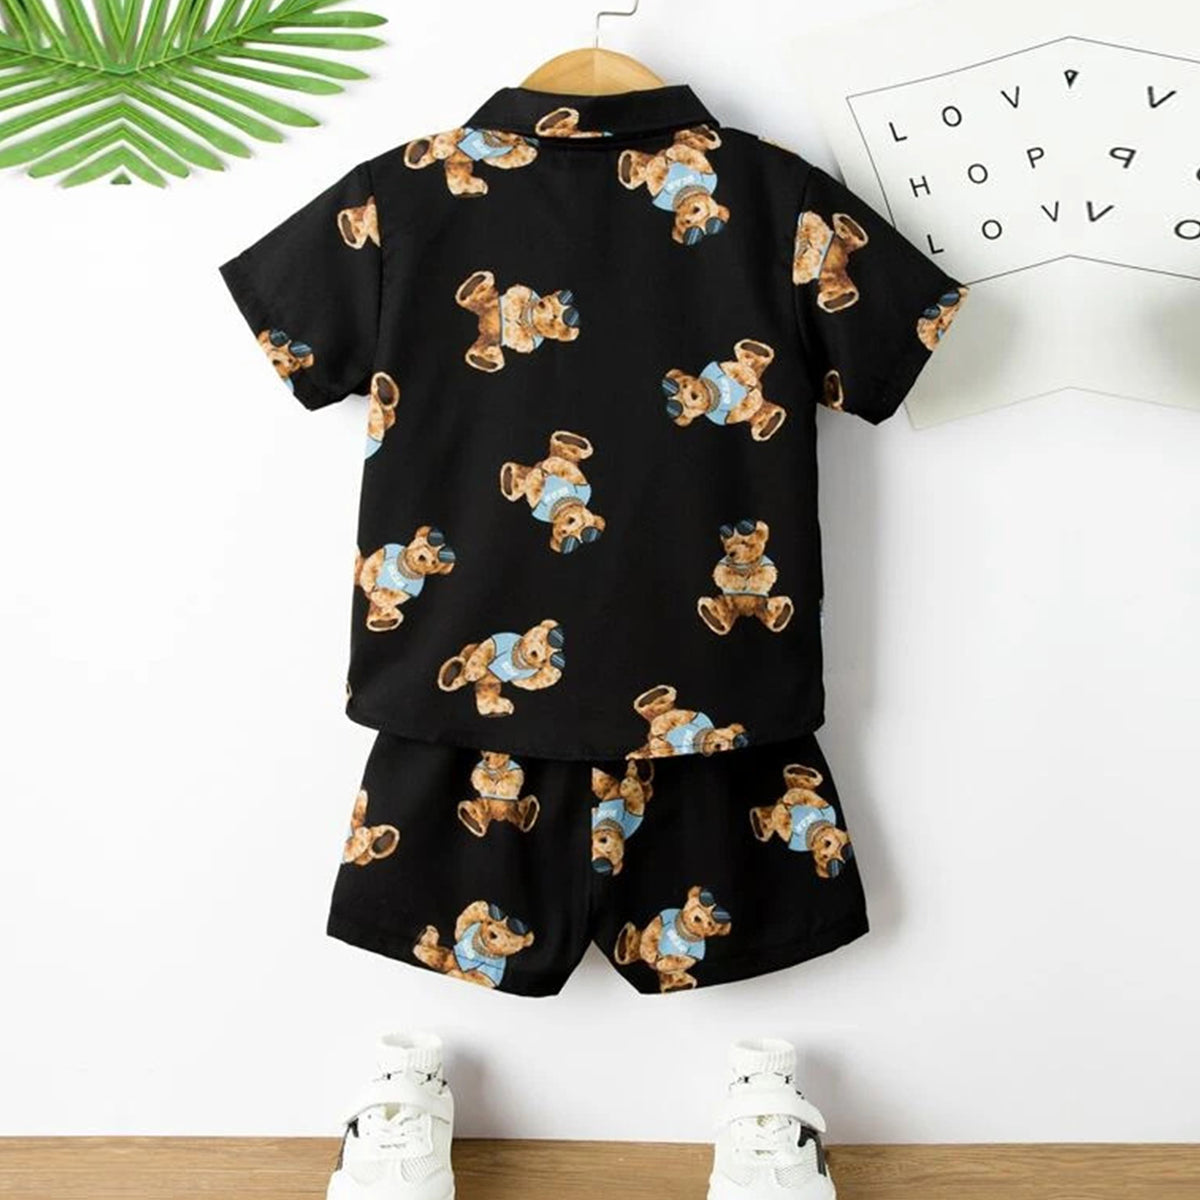 Venutaloza Baby Set Apricot-Colored & Bear (Combo Pack Of 2) Shirt & Shorts Without tee Two Piece Set For Boy & Girls.